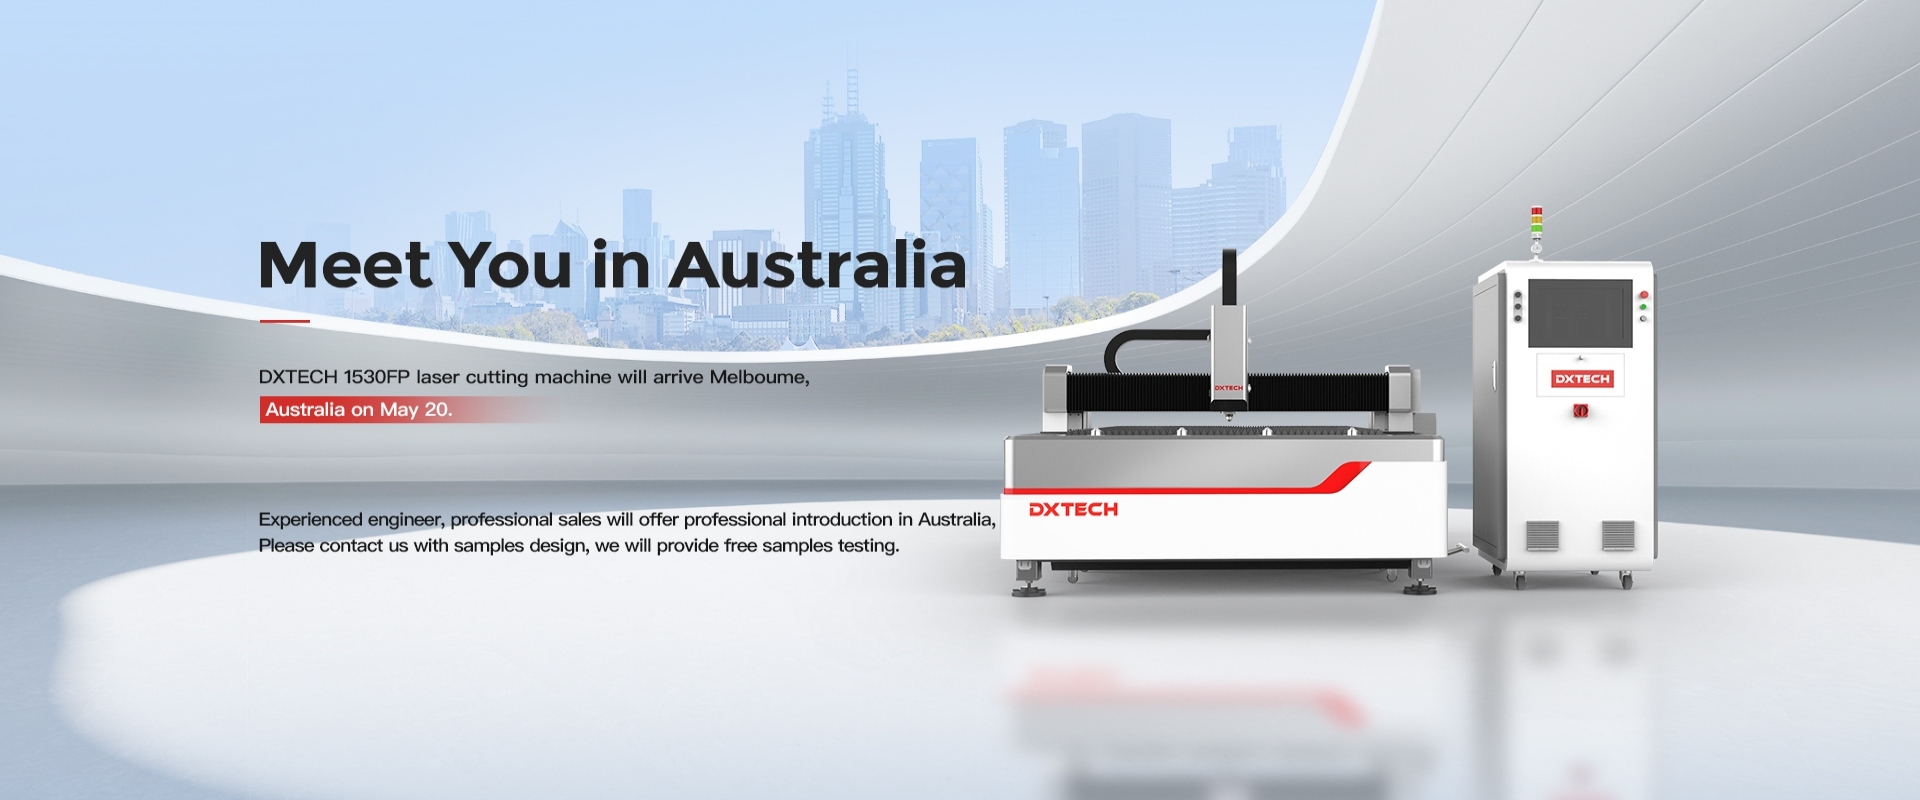 DXTECH waits for you in Australia